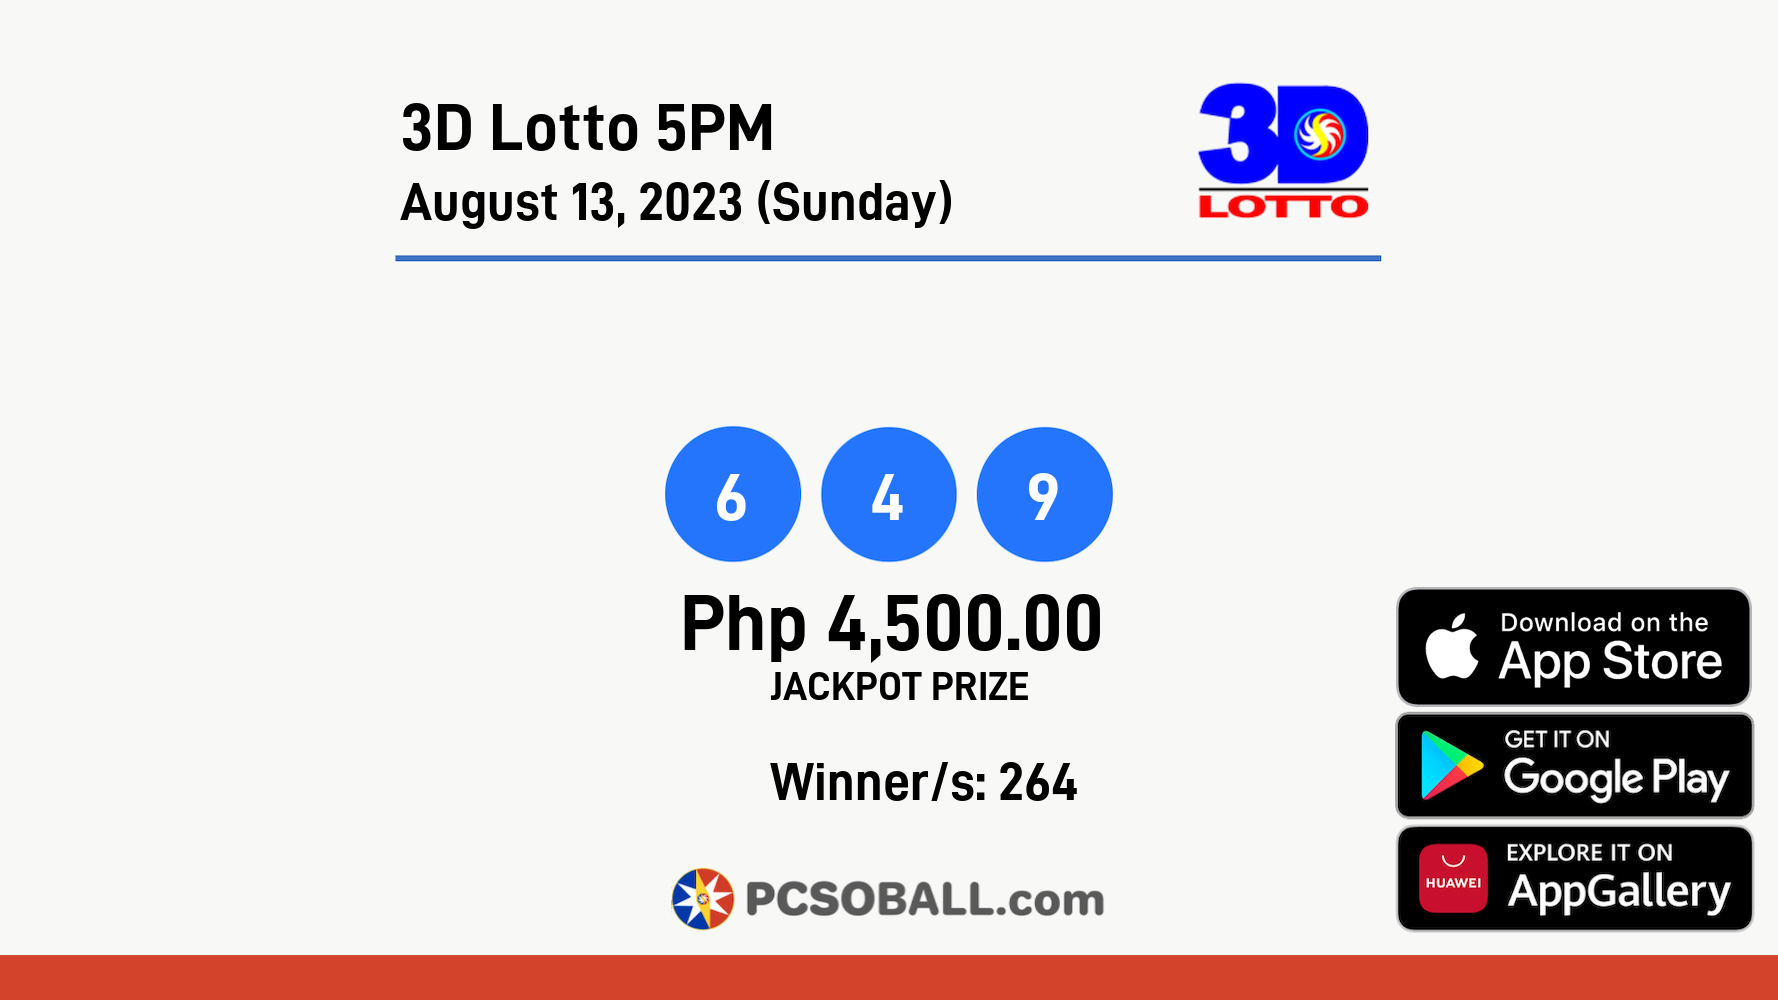 3D Lotto 5PM August 13, 2023 (Sunday) Result